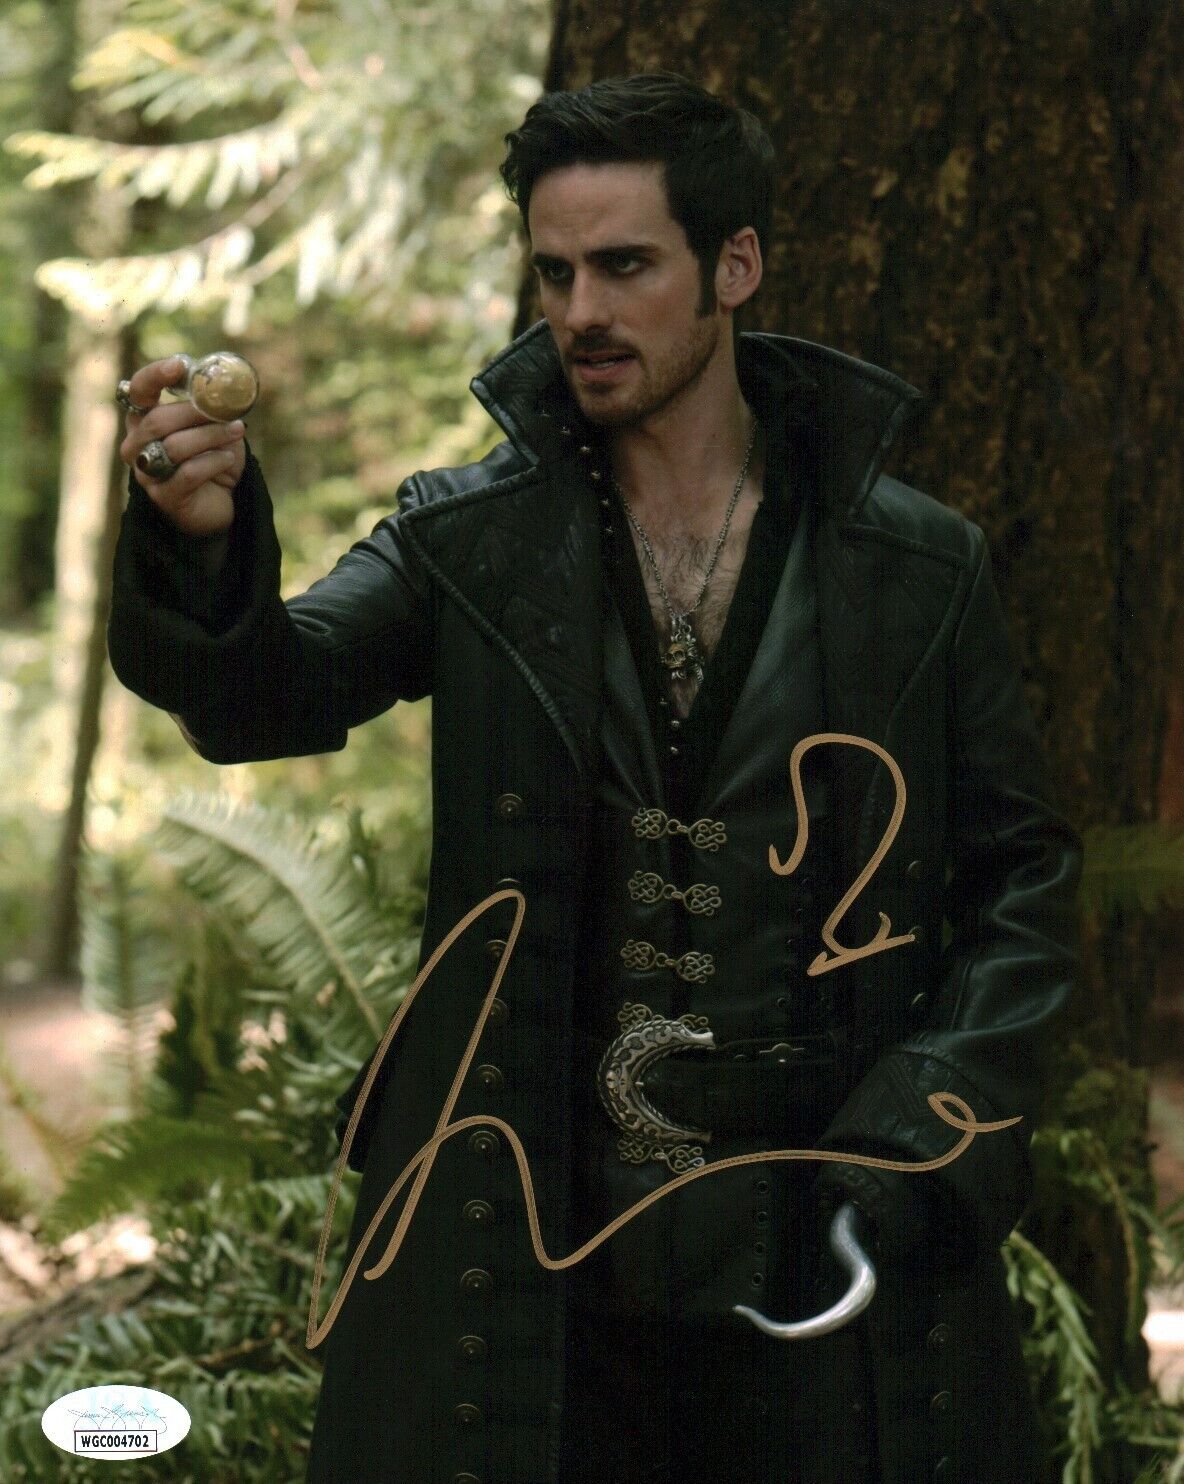 Colin O'Donoghue Once Upon A Time 8x10 Signed Photo JSA Certified Autograph